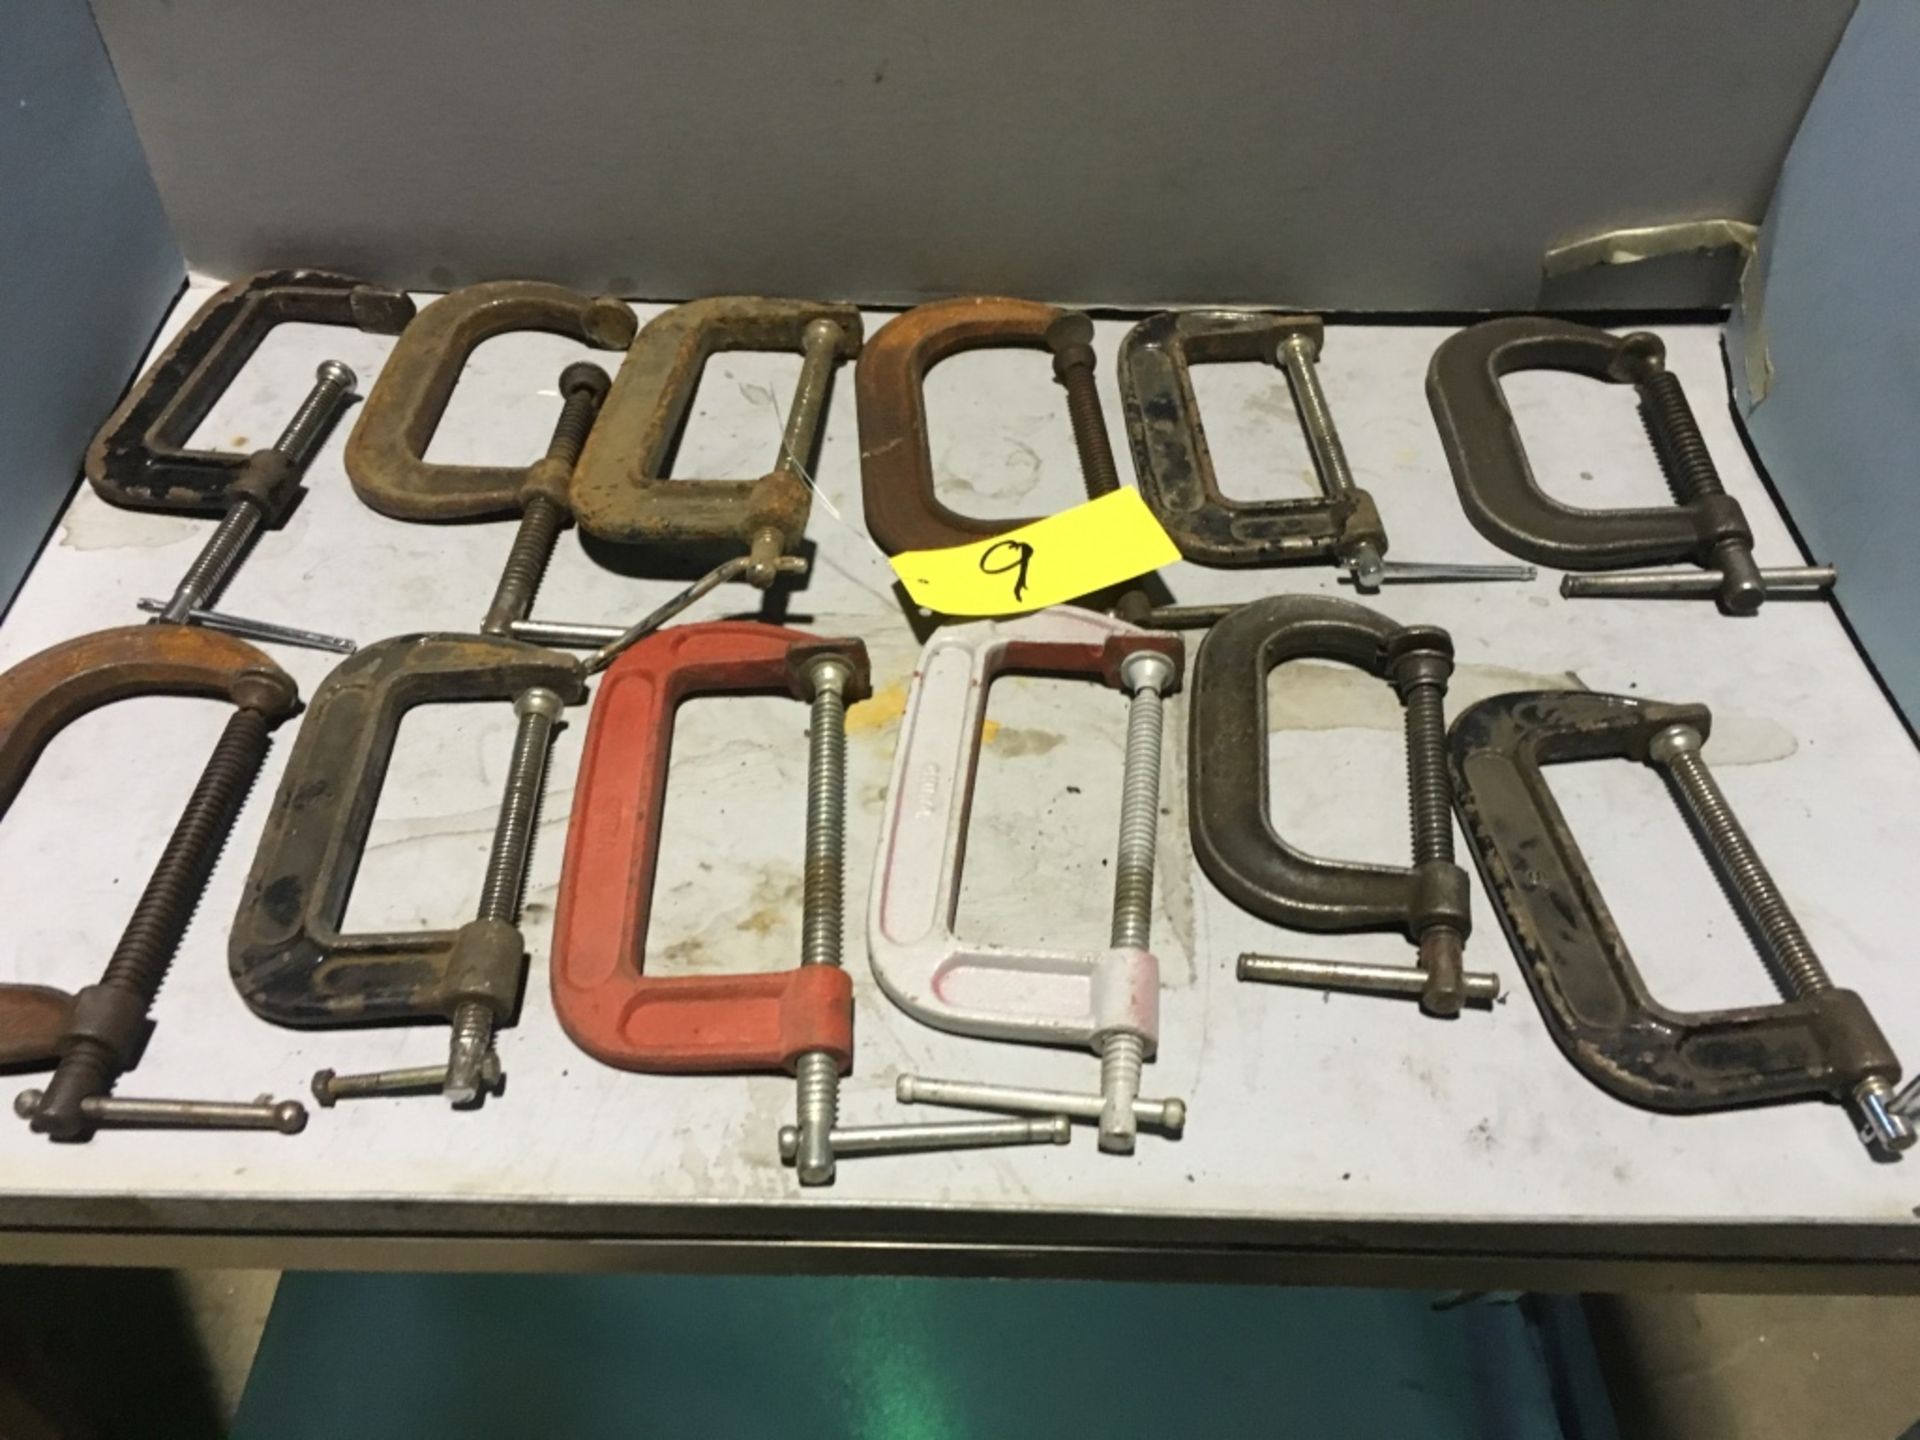 Approximately (17) C-clamps, various sizes.